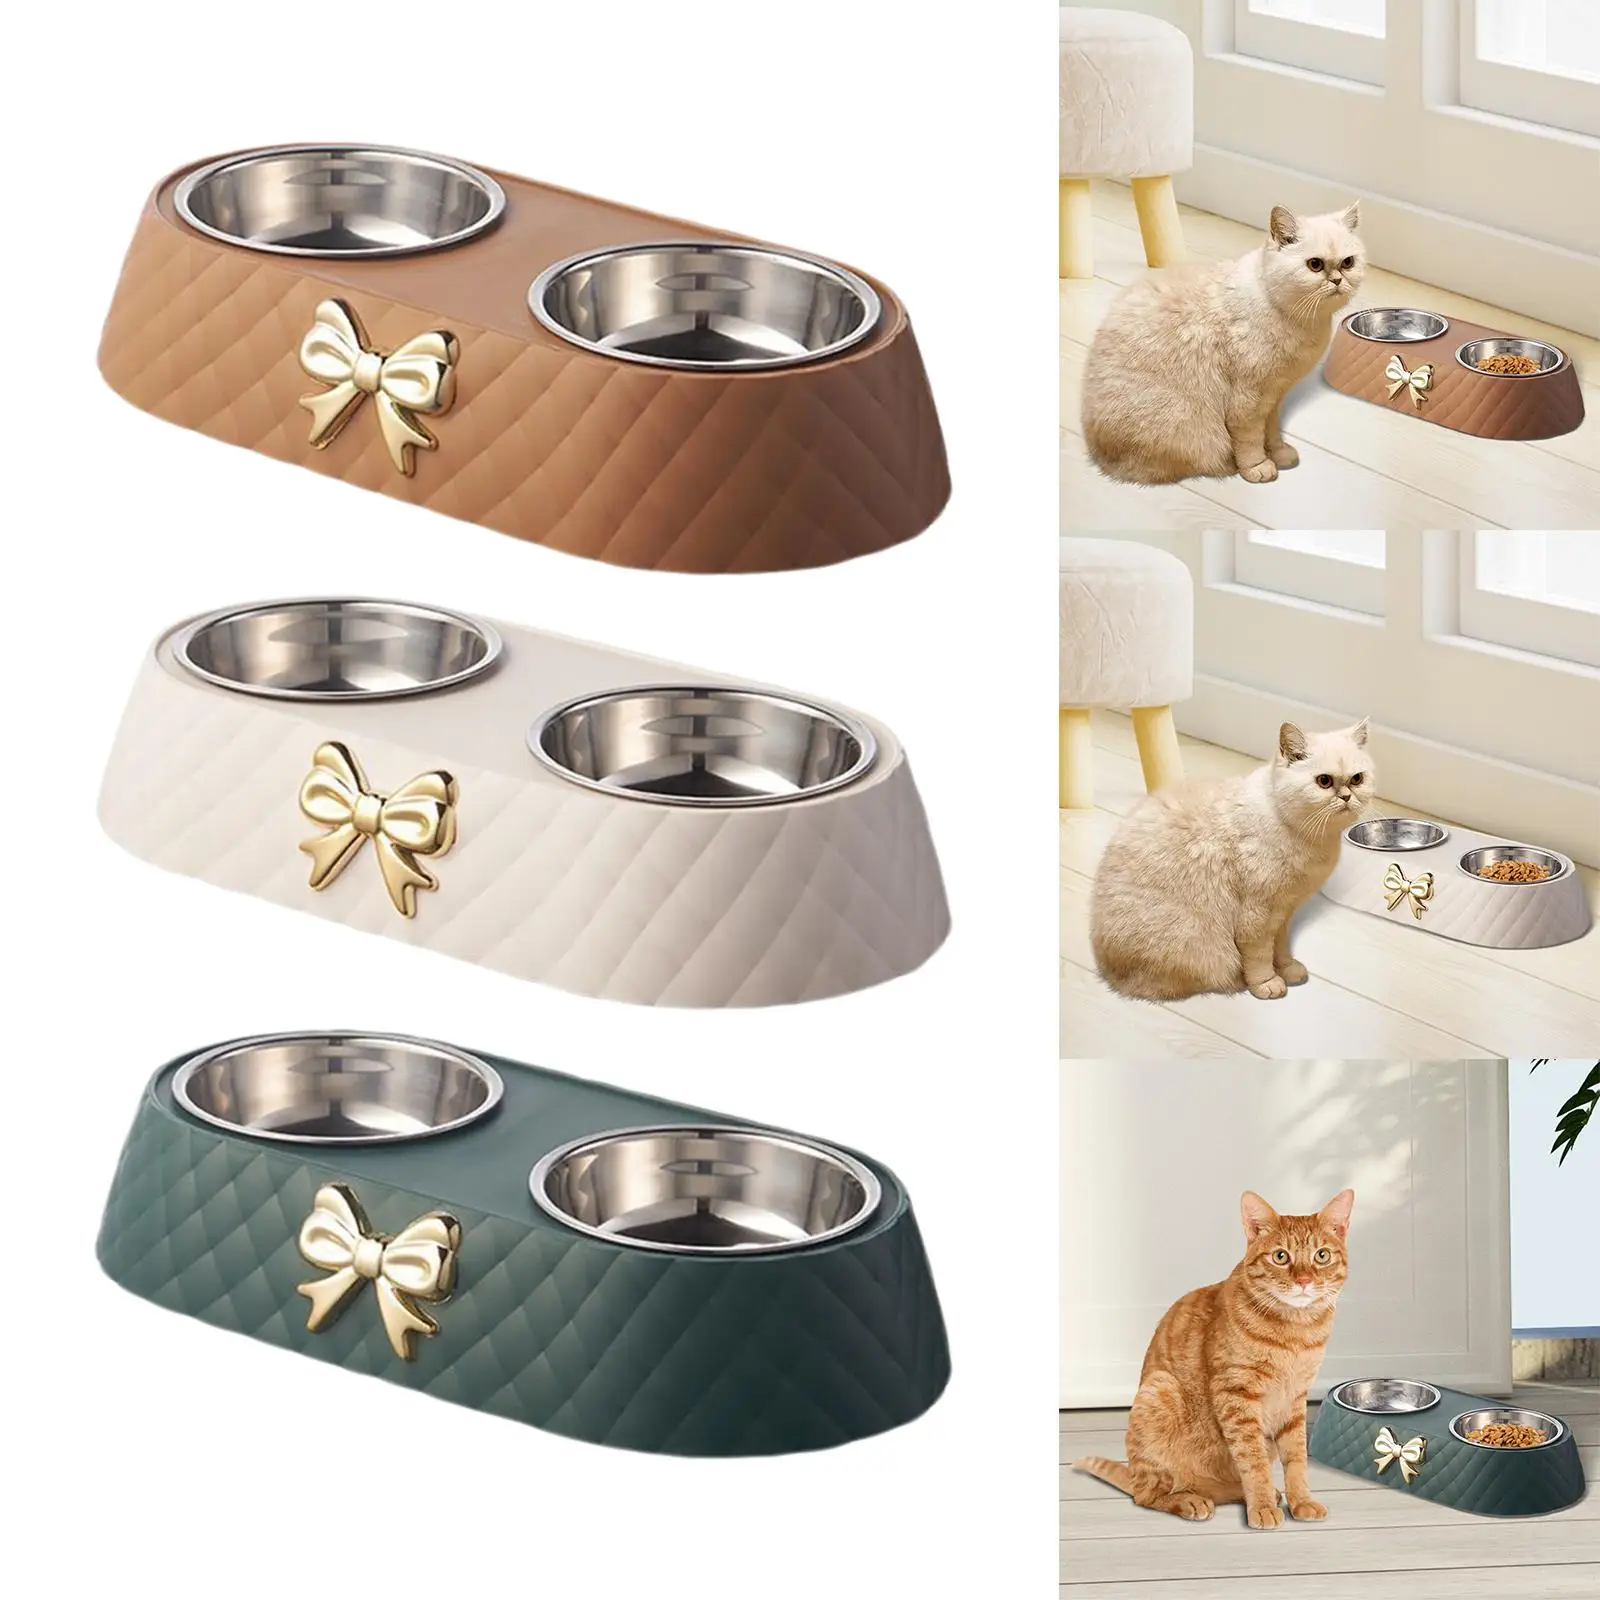 Dog Cat Double Bowls Removable Size 34x17.5x6.5cm Anti Slip Accessories Durable Simple to Clean for Small Dogs Puppy Convenient